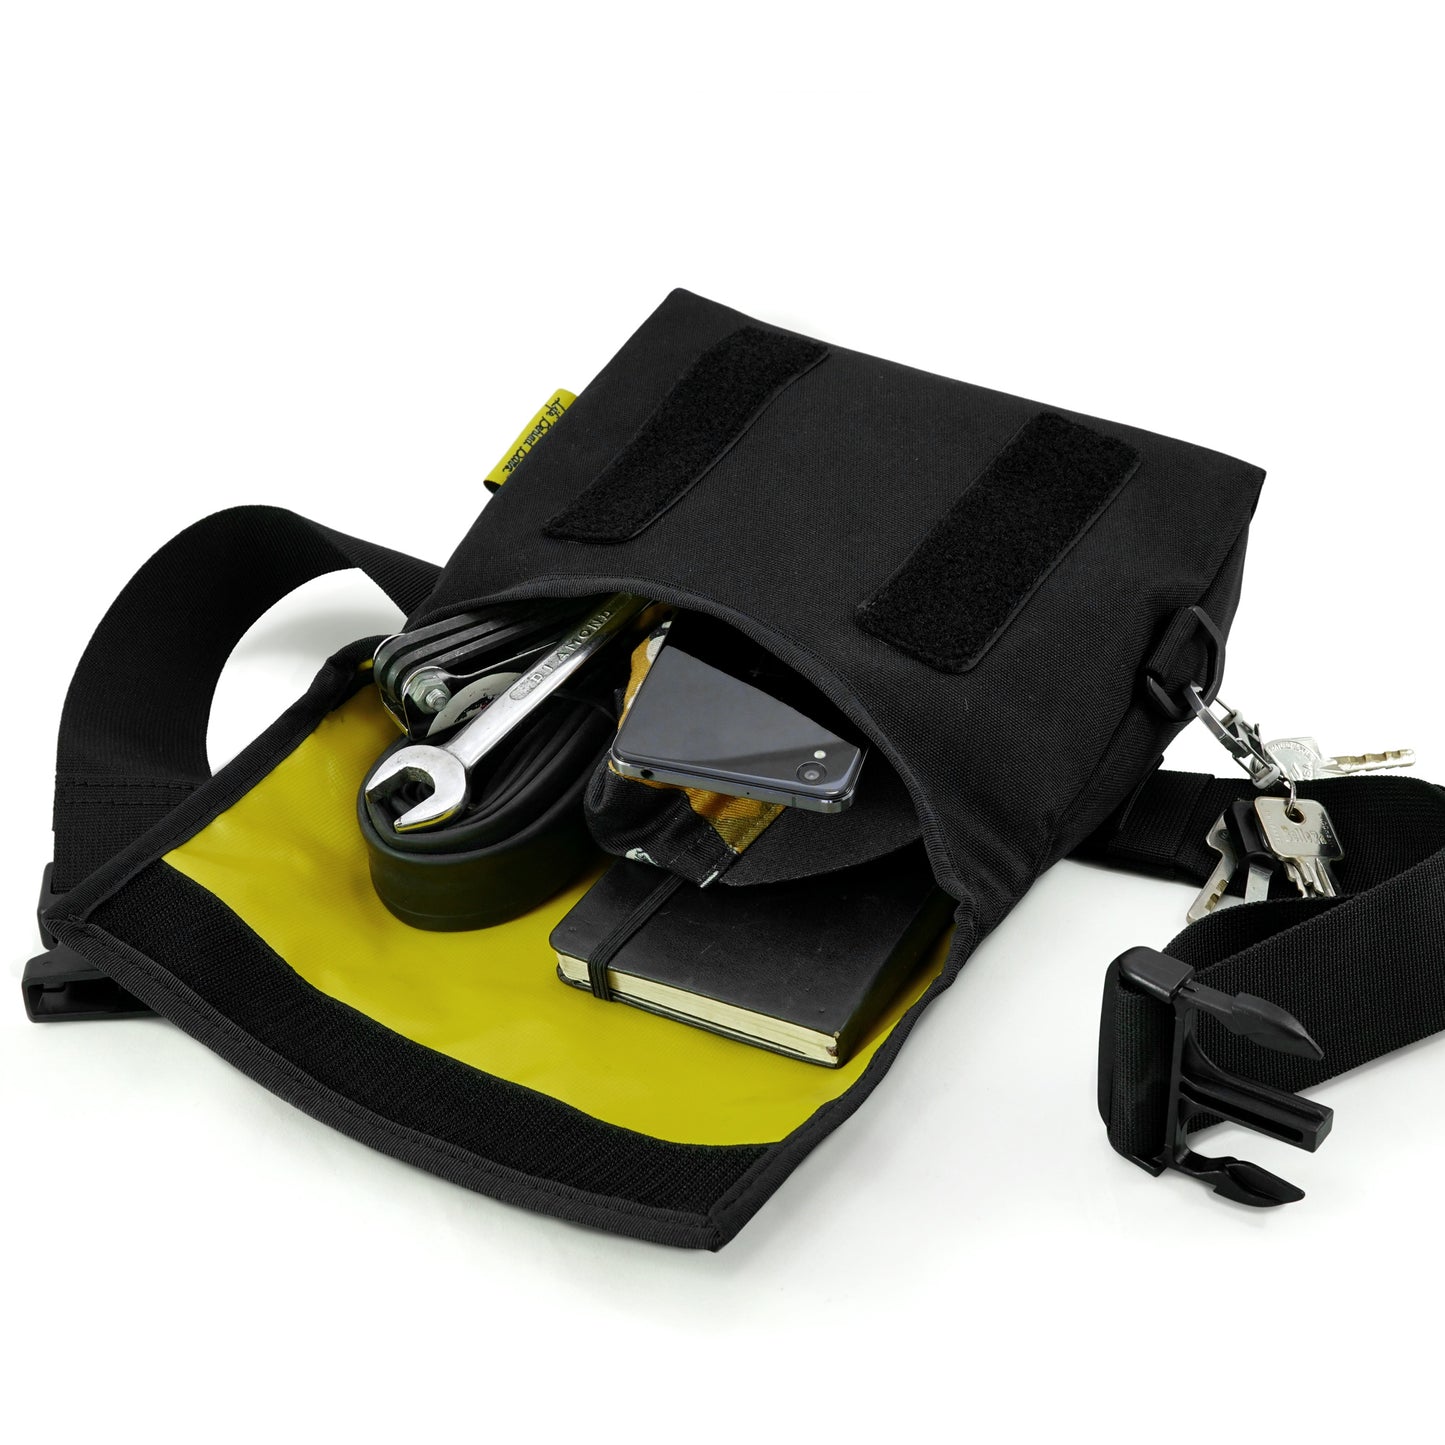 The Musette - Black